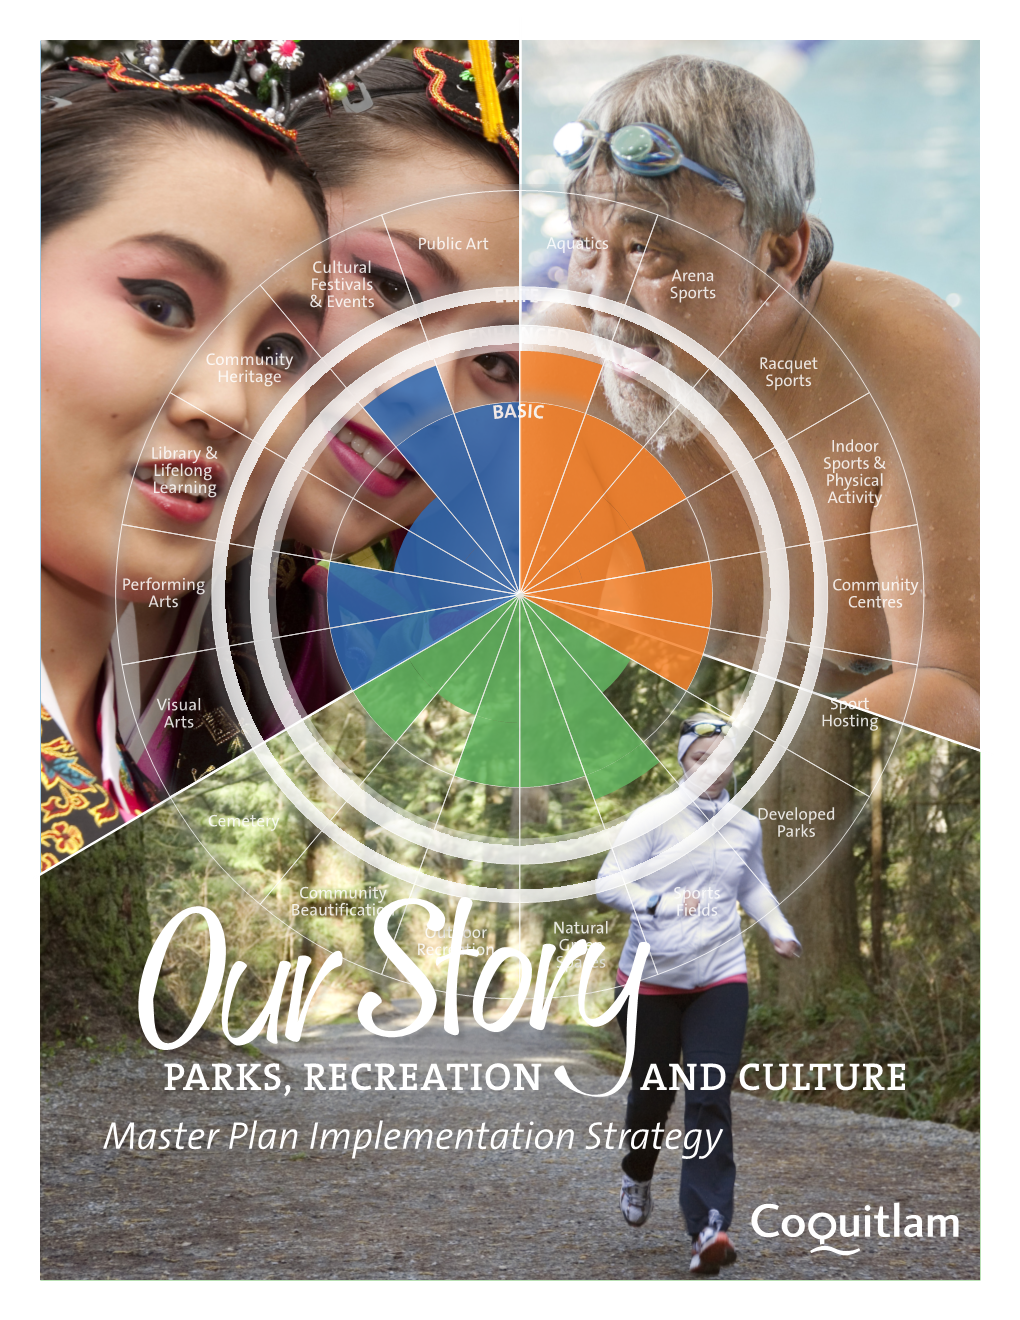 Parks, Recreation and Culture Master Plan Implementation Strategy 2015